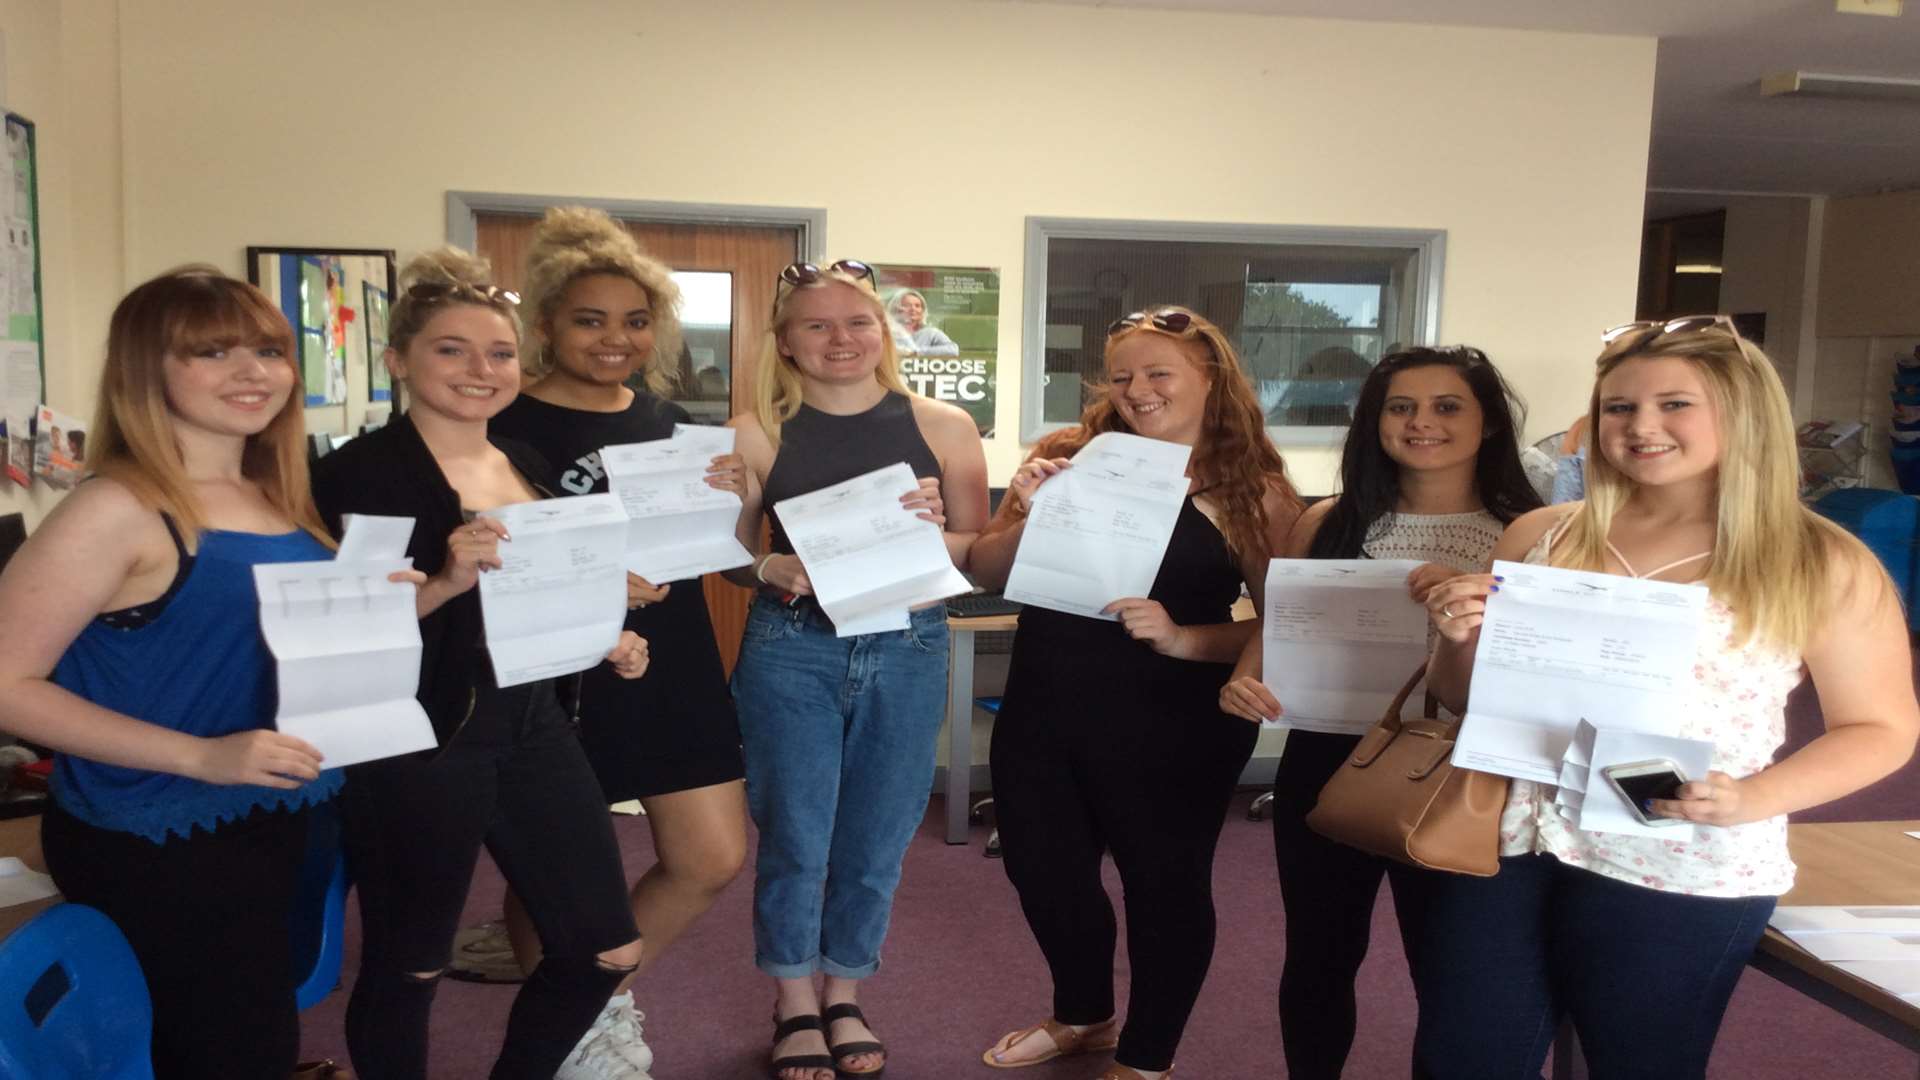 Sittingbourne Community College BTEC dance students who had a record breaking year of A-level results